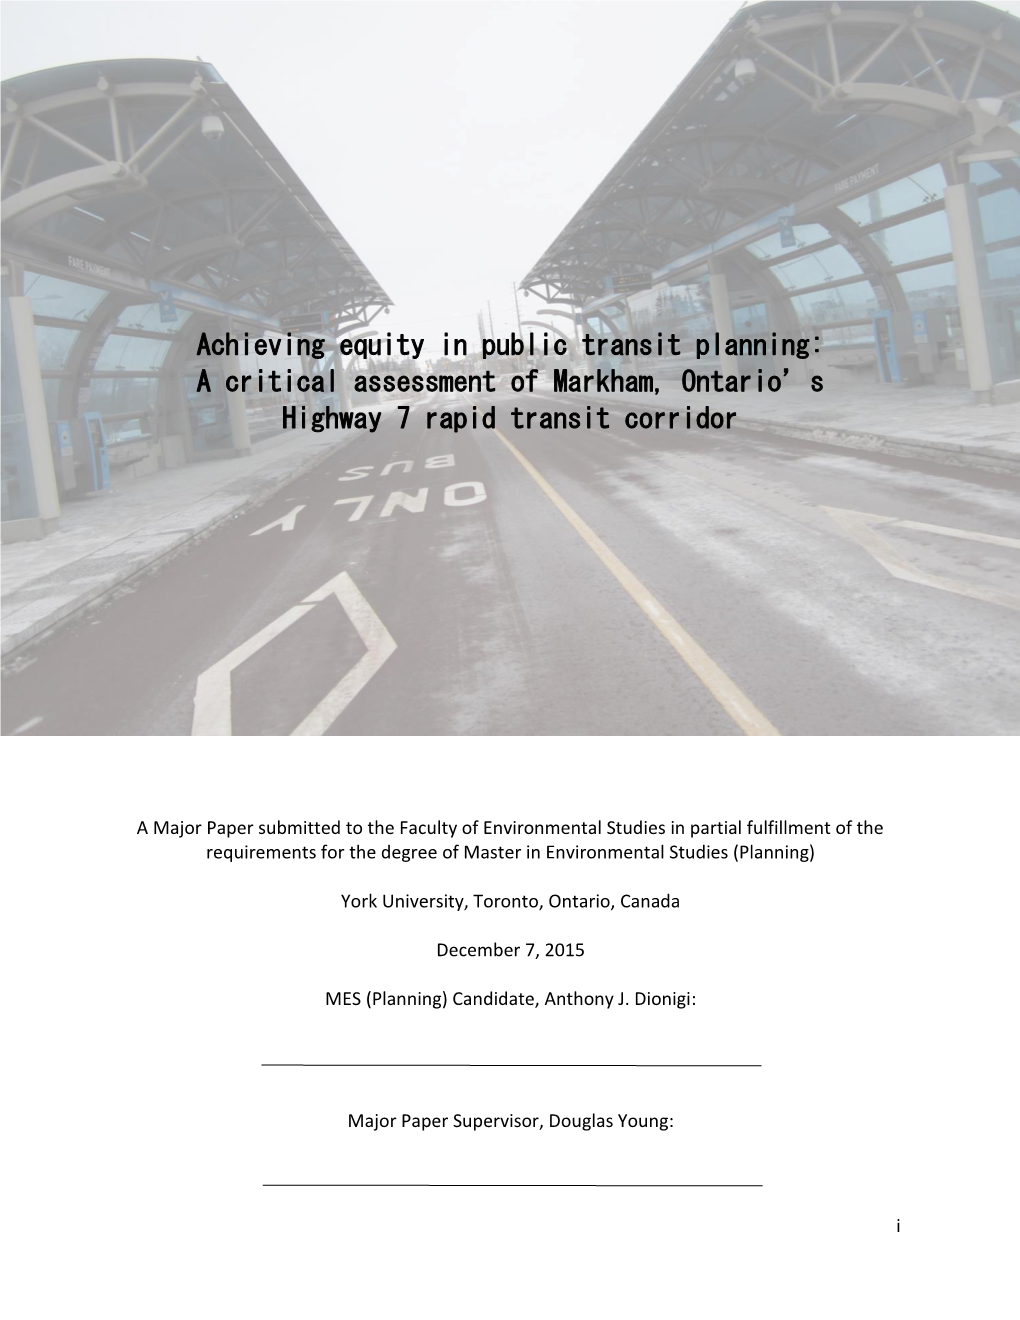 Achieving Equity in Public Transit Planning: a Critical Assessment of Markham, Ontario's Highway 7 Rapid Transit Corridor